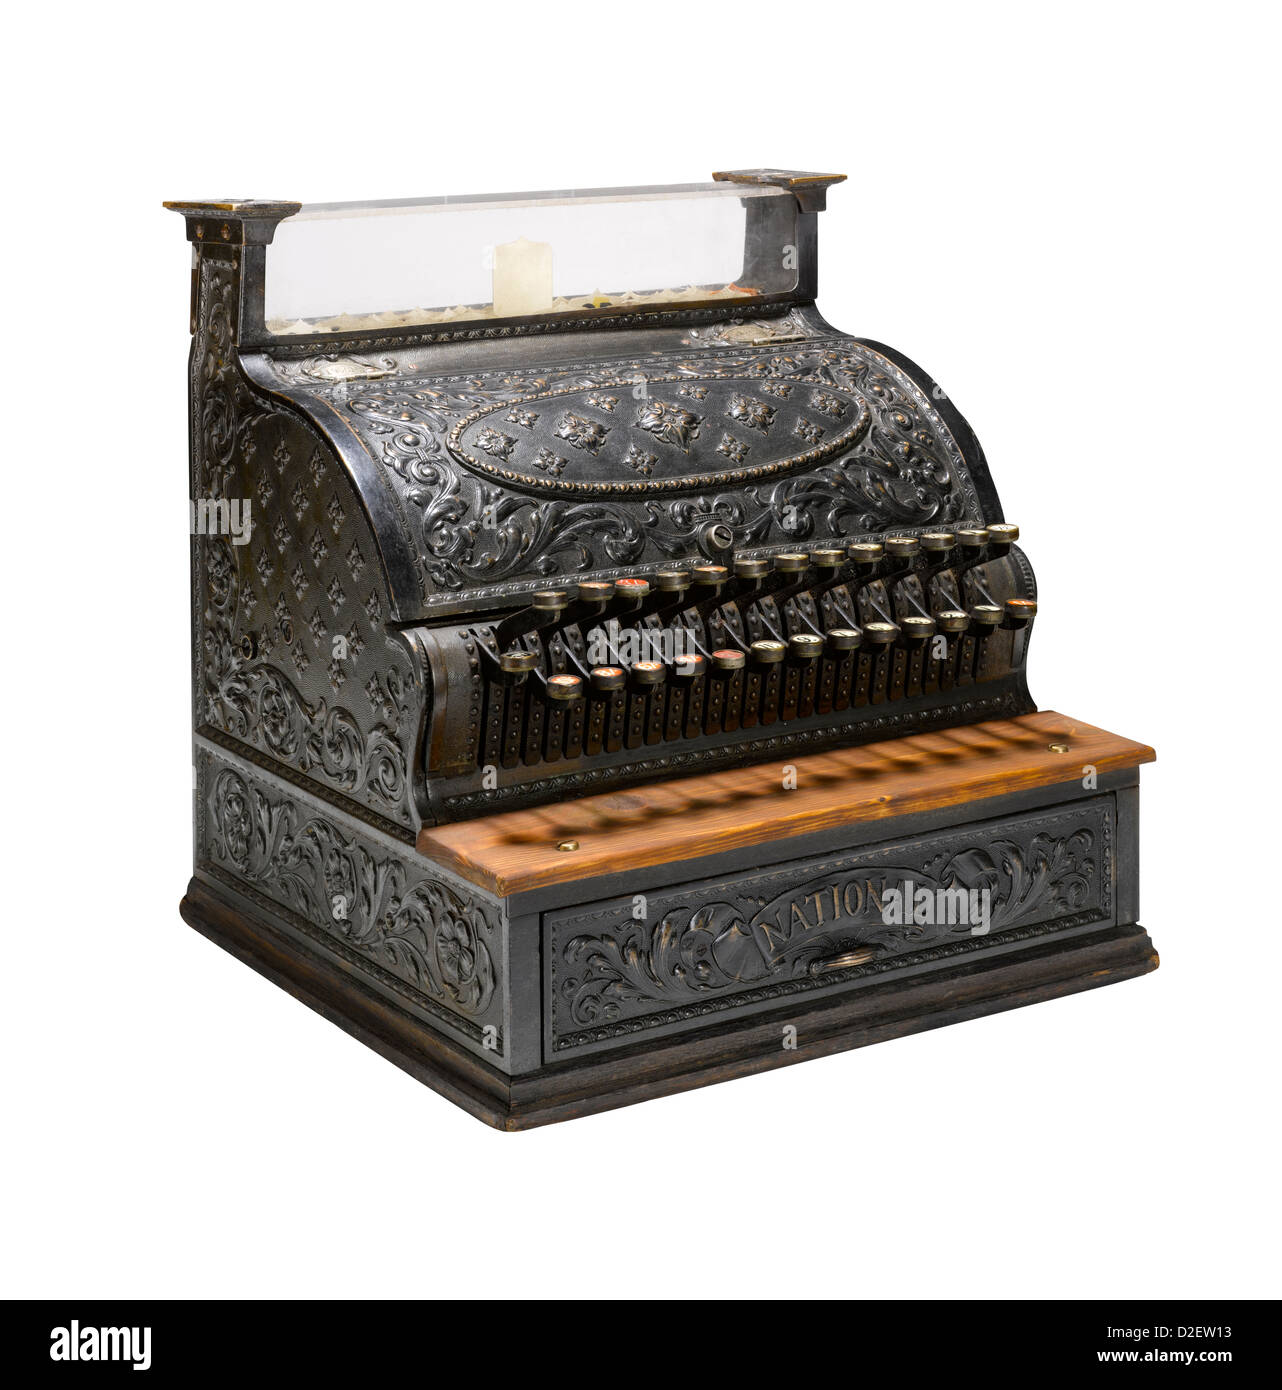 An old fashioned cash register Stock Photo